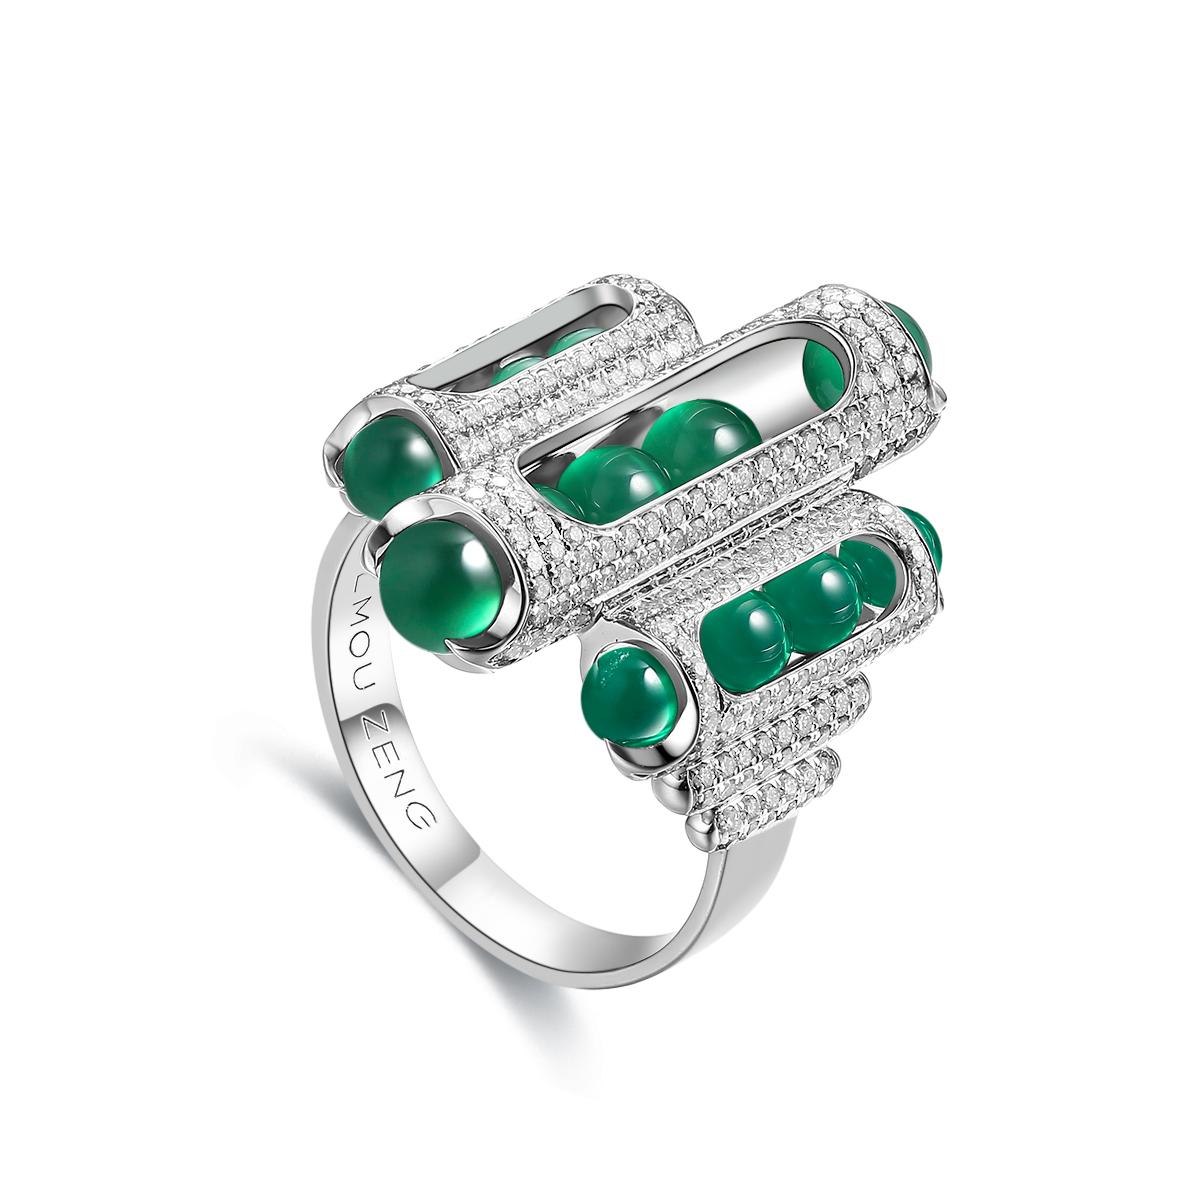 Melody collection won Boodles Gold Award at the Goldsmiths’ Craft & Design Awards, known as the UK ‘Jewellery Oscars’, 2019. This piece has been included in BB Publication's first ever jewellery edition coffee table book 2020: Spectacular and